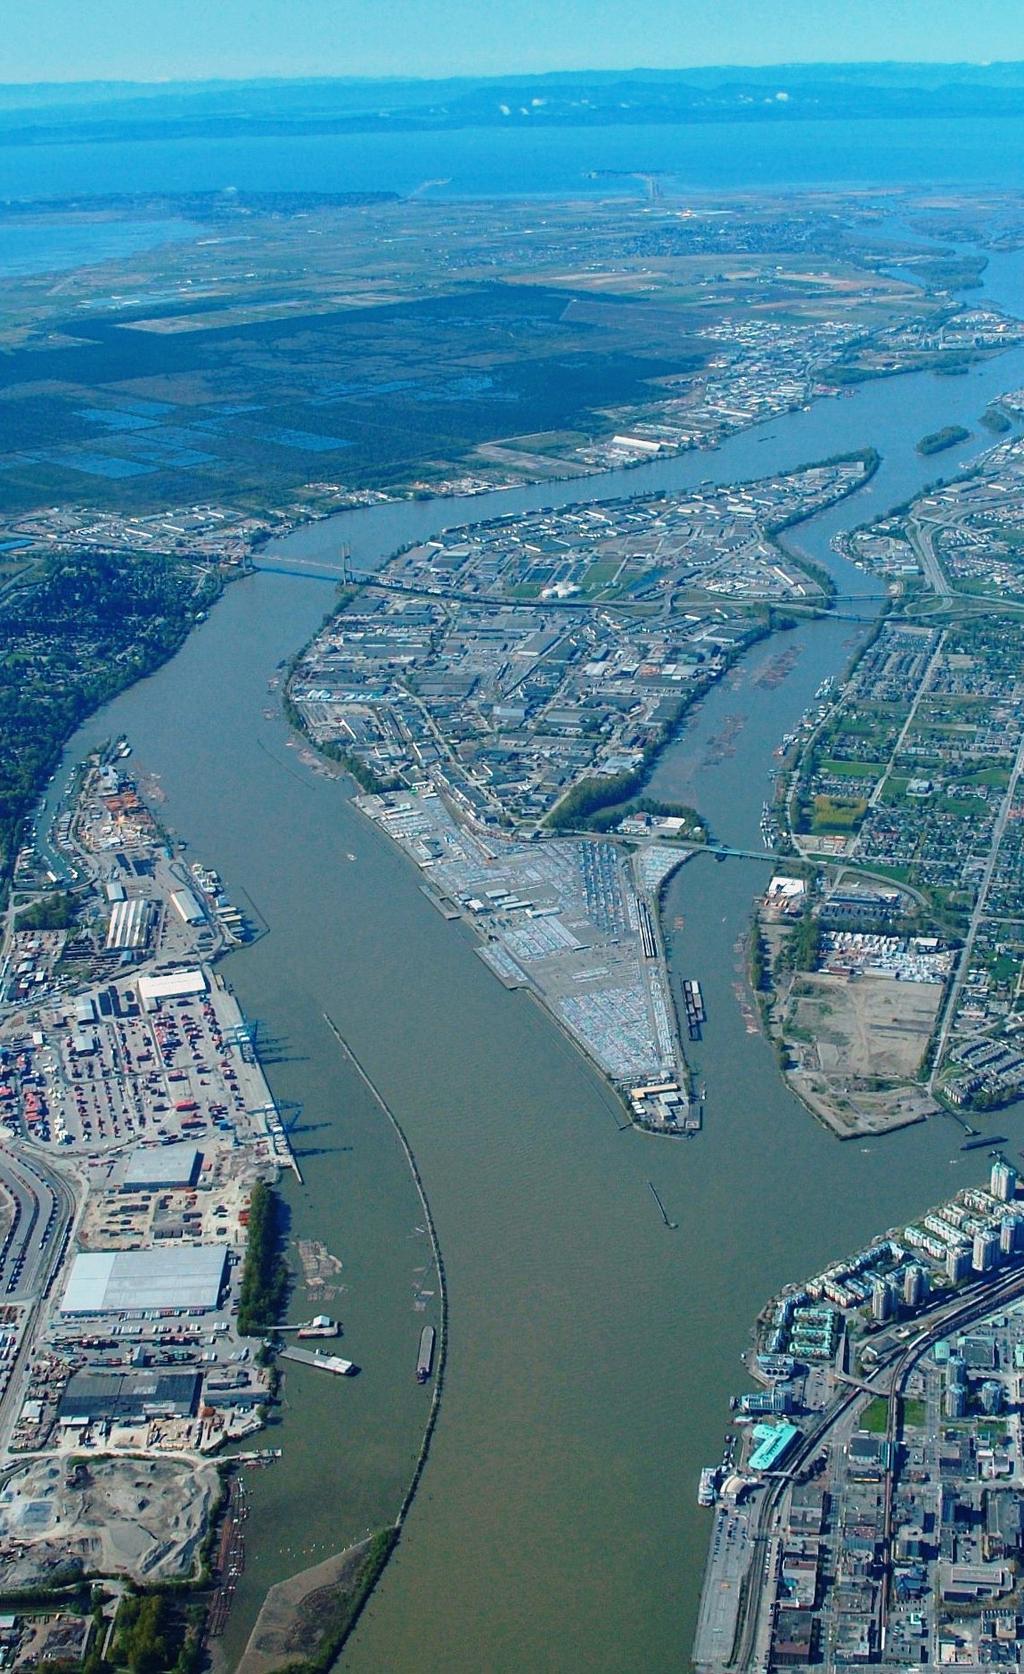 FRASER RIVER CROSSING PLANNING AND EVALUATION STUDY